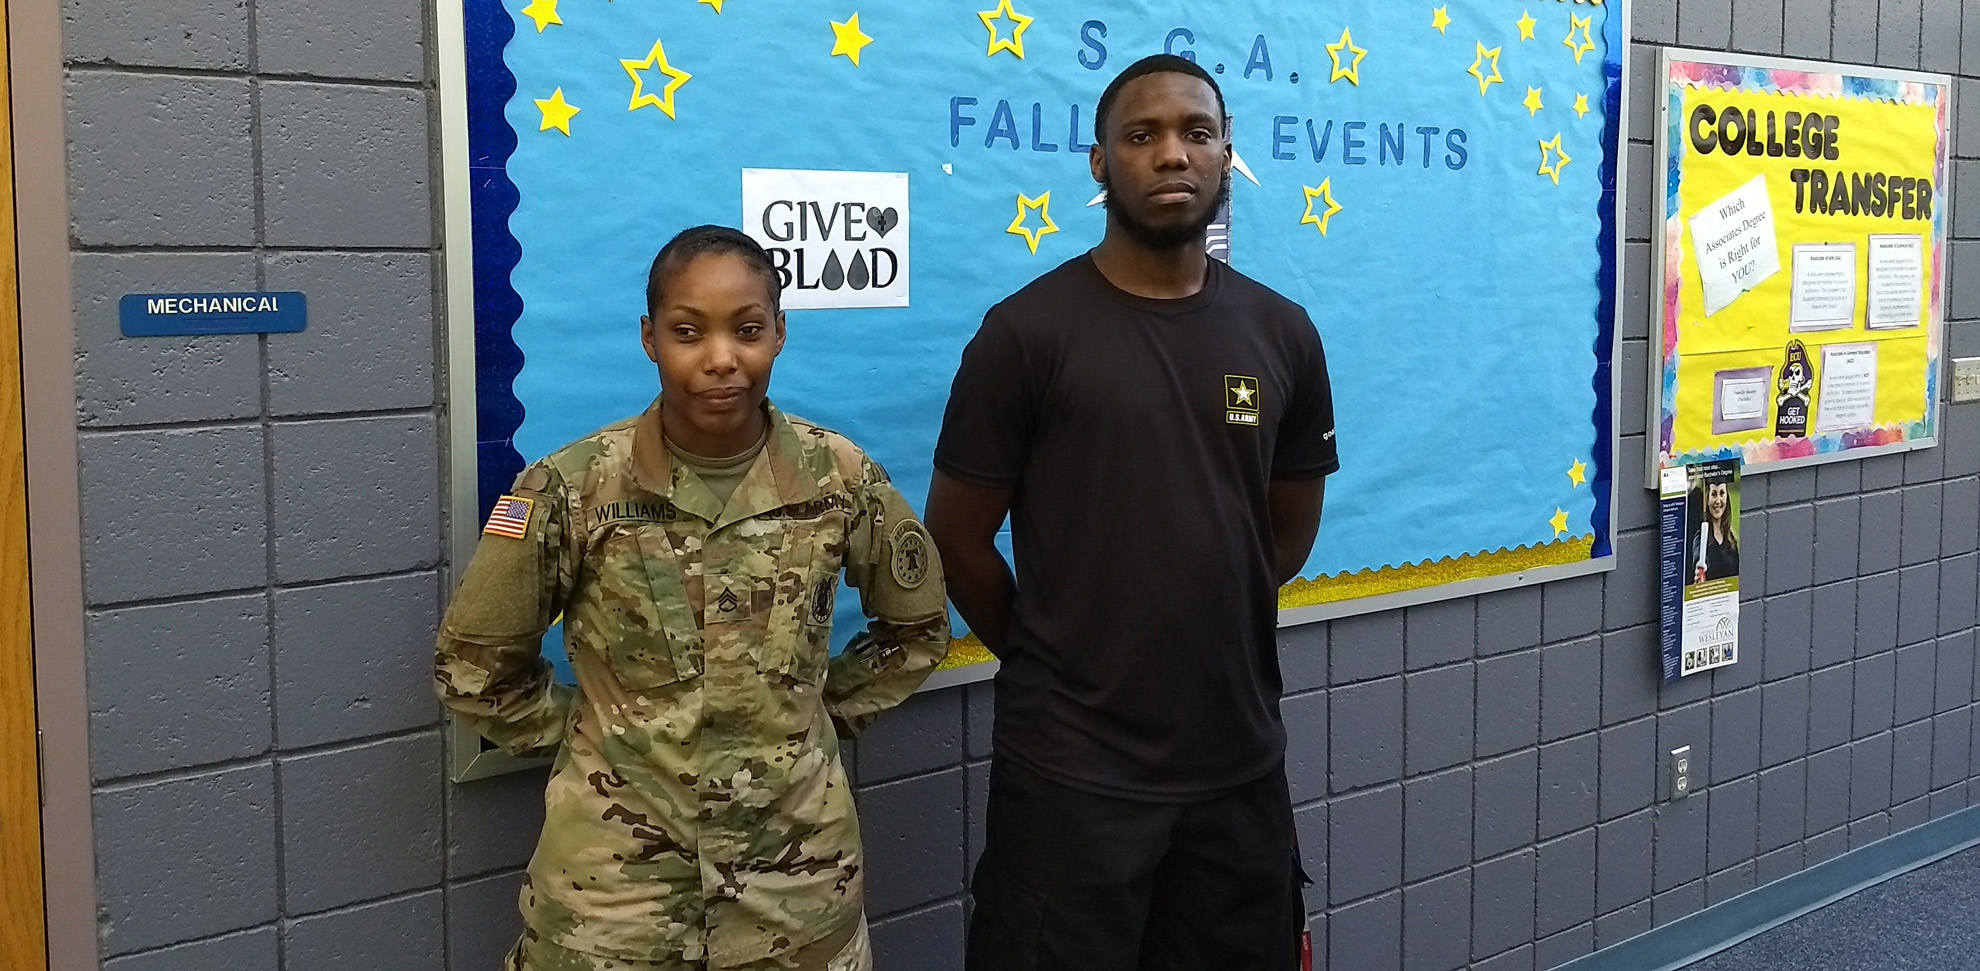 Sgt. Danielle Williams (left) with Pvt. Daniel Maultsby